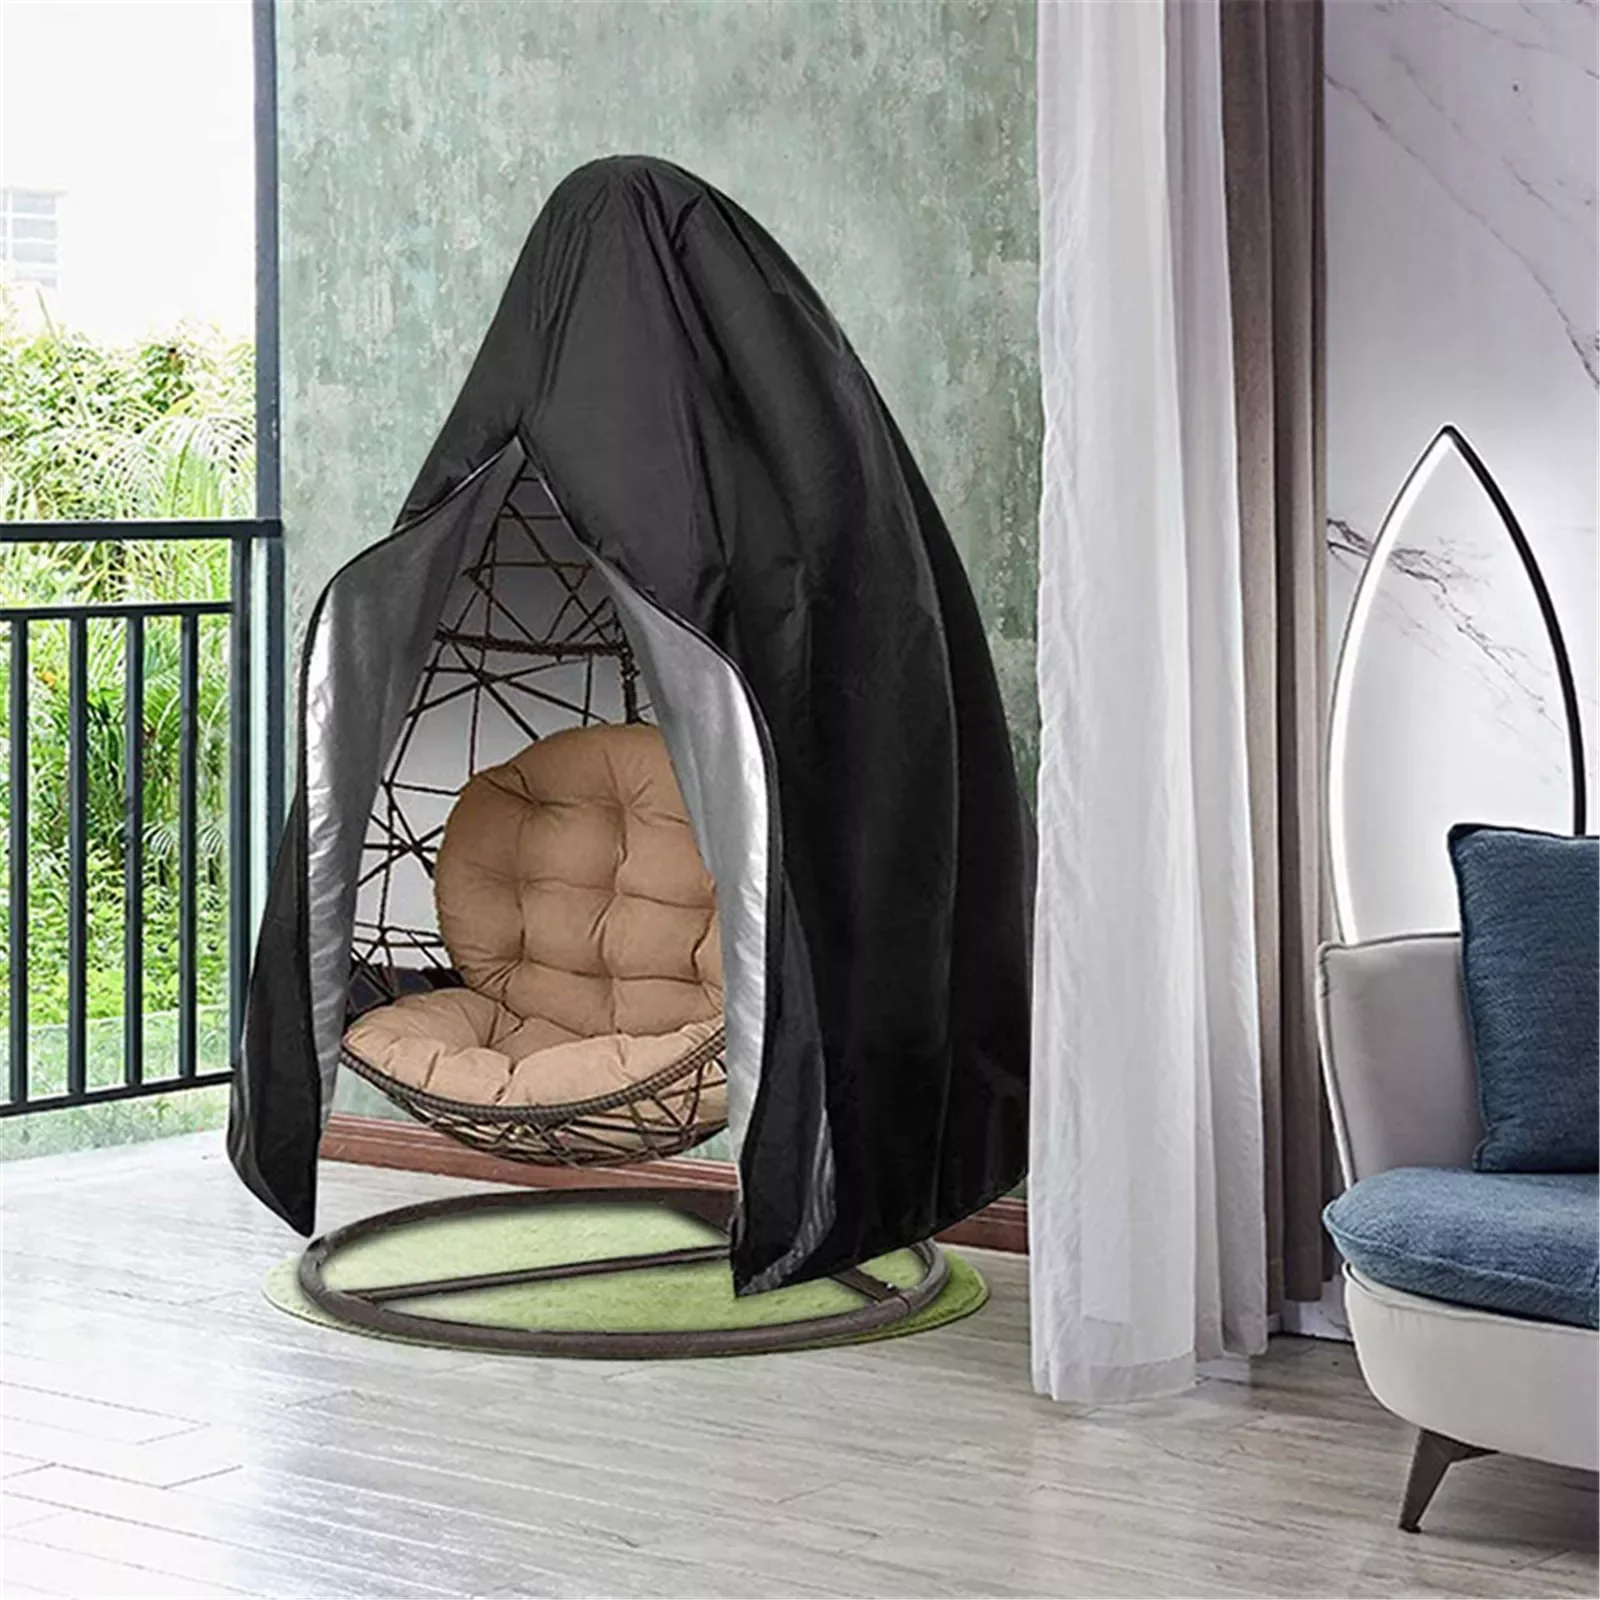 Egg Chair Cover Outdoor Swing Chair Cover Waterproof Anti-dust With Zipper 210D Oxford Fabric Garden Chair Protector